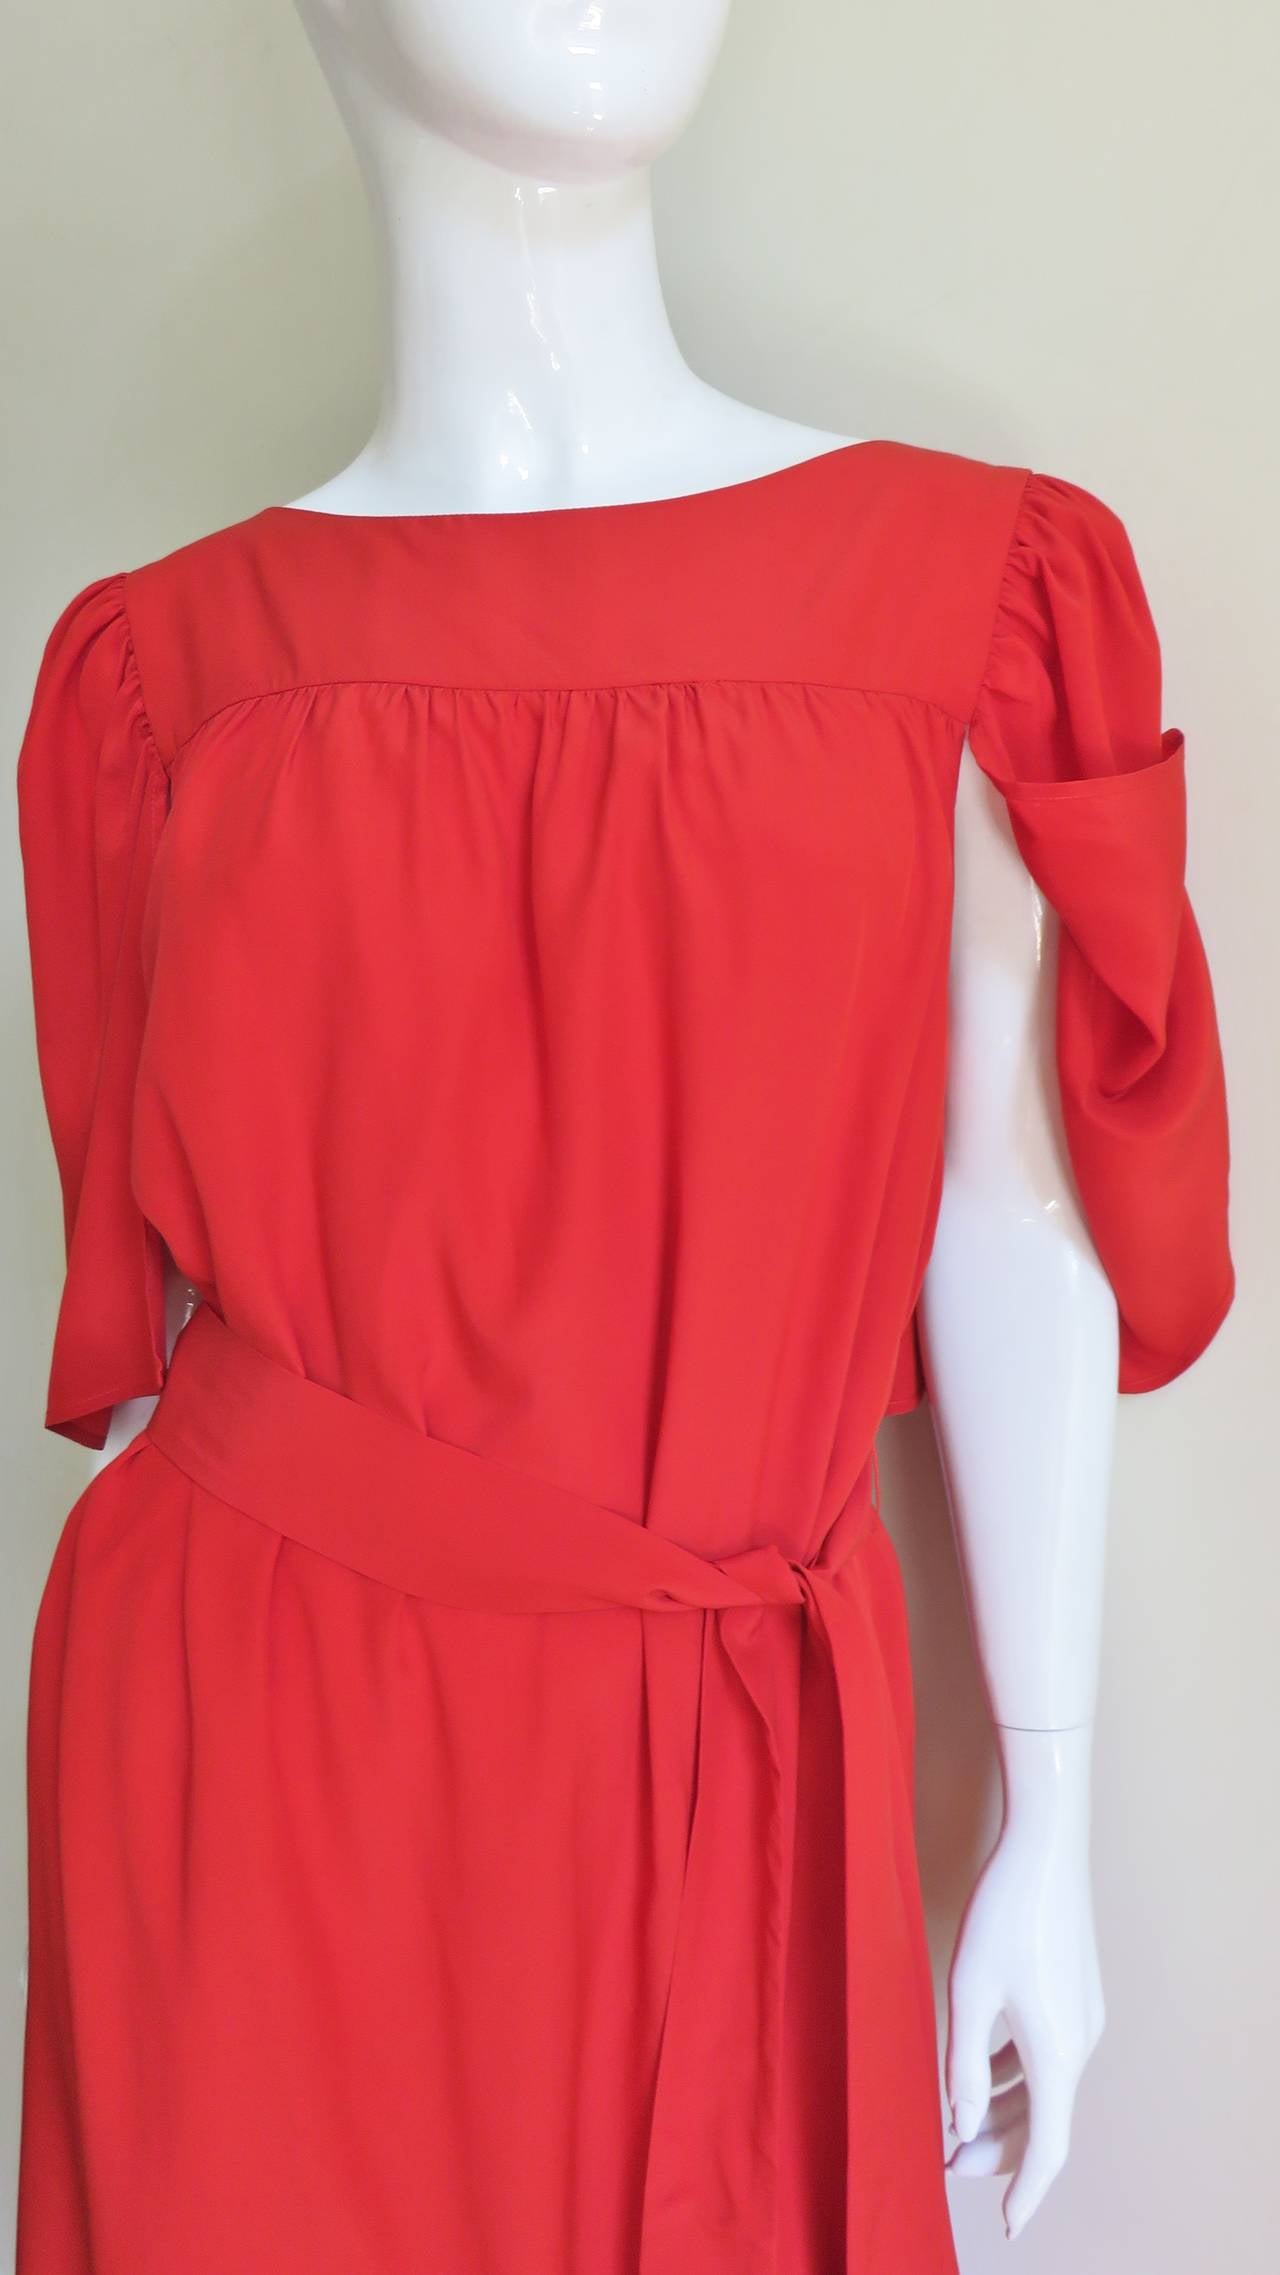 Yves Saint Laurent Silk Dress With Cape For Sale at 1stdibs